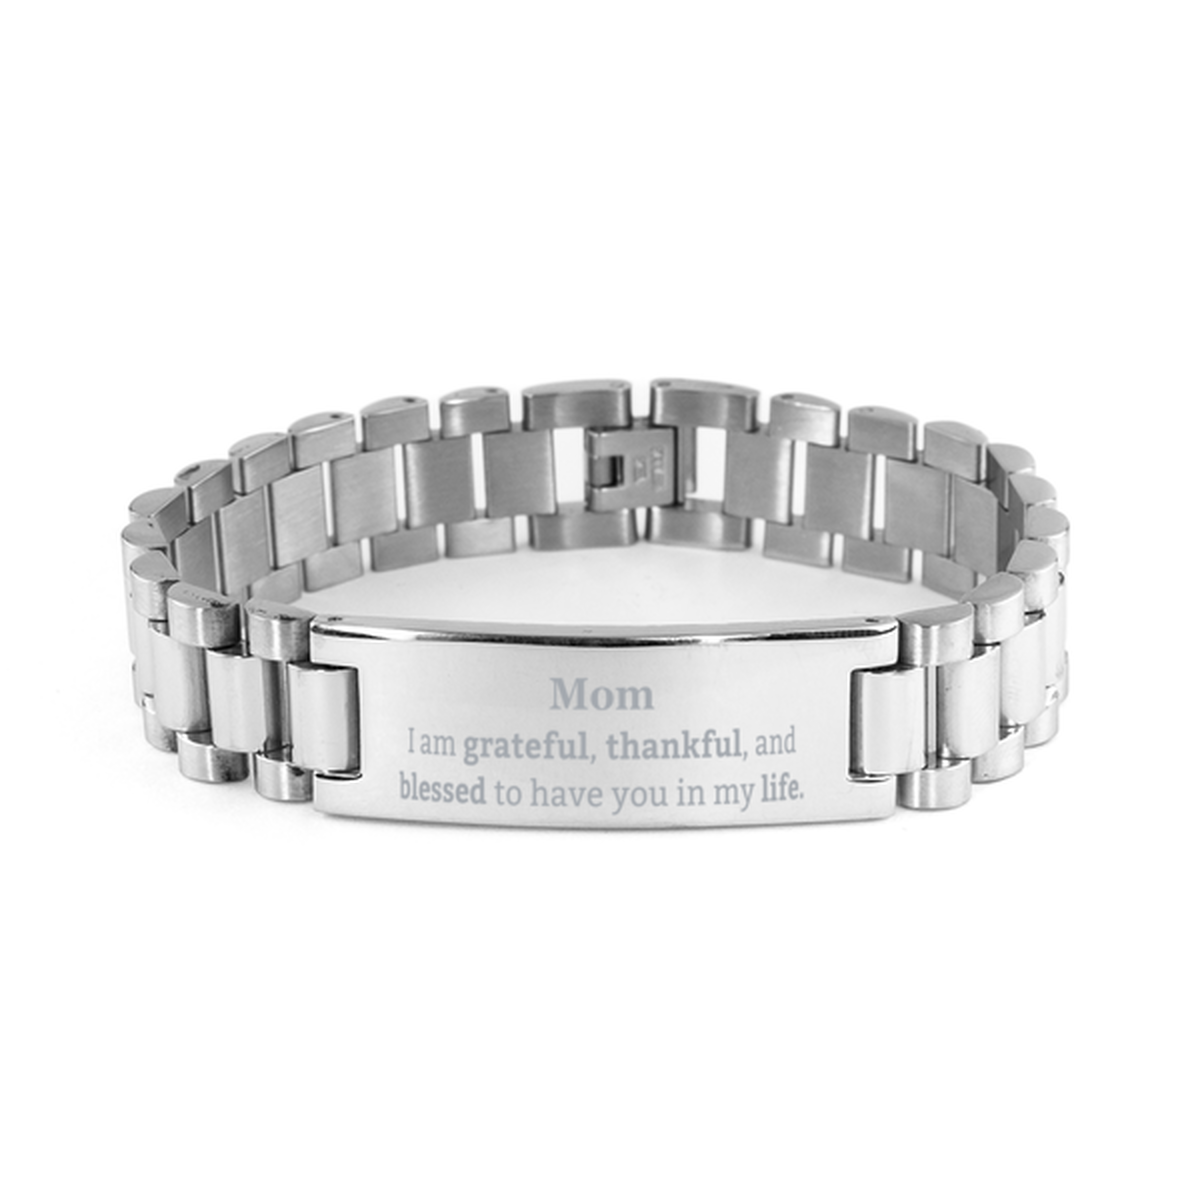 Mom Appreciation Gifts, I am grateful, thankful, and blessed, Thank You Ladder Stainless Steel Bracelet for Mom, Birthday Inspiration Gifts for Mom